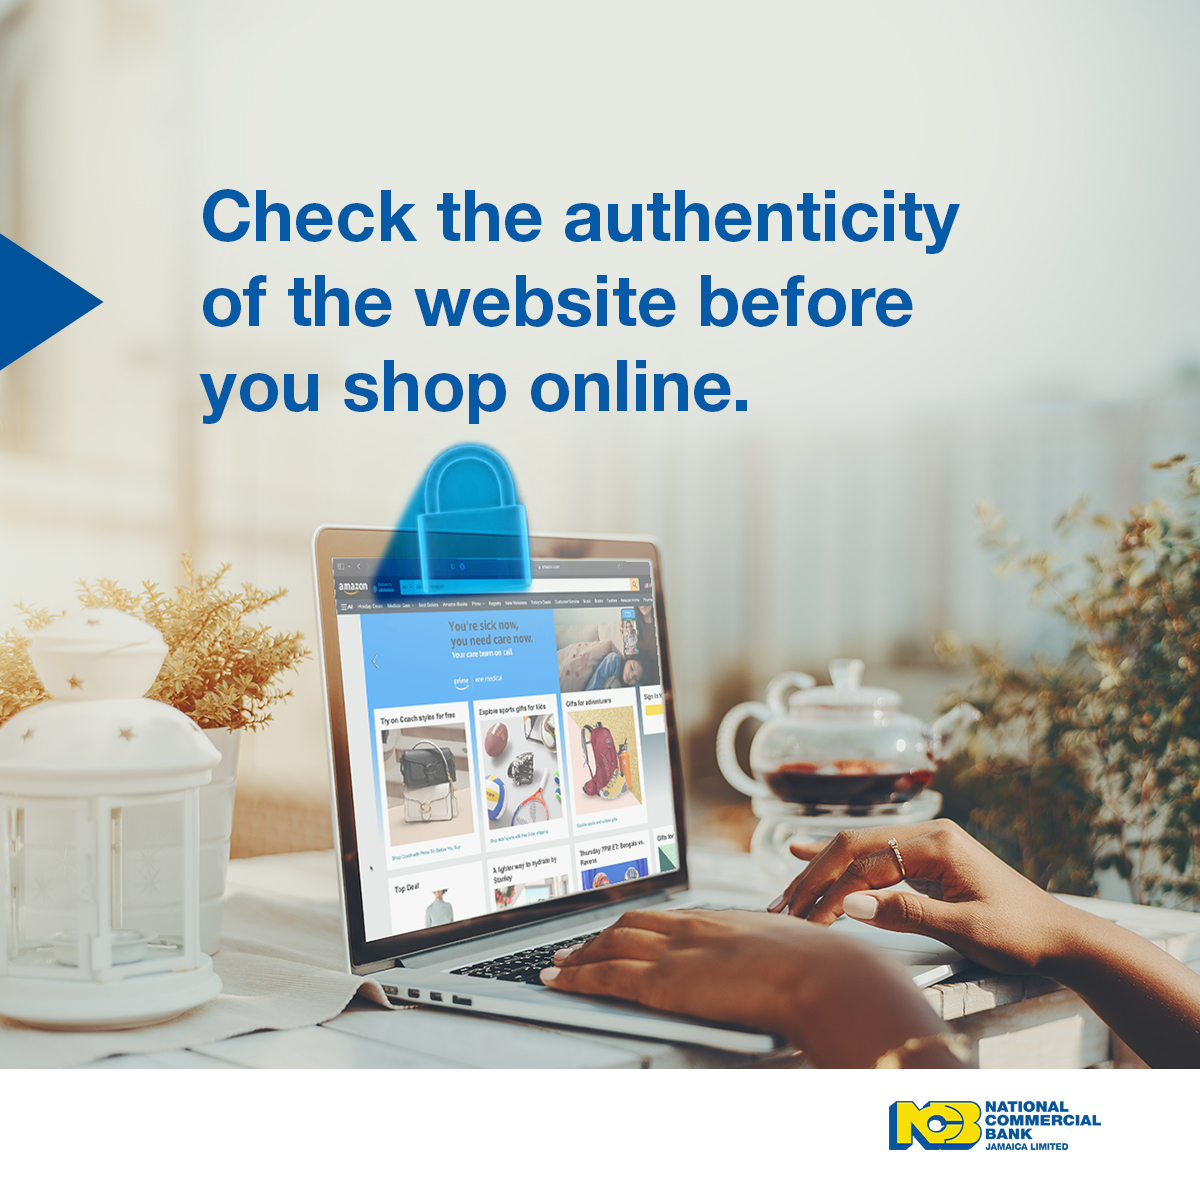 Always check the authenticity of the website you’re shopping on. Be sure there is a locked padlock beside the https in your search bar. Once safe, grab those deals using your NCB Credit Card and enjoy rewards! #OnlineSafetyTip #NCBSafe #NCB